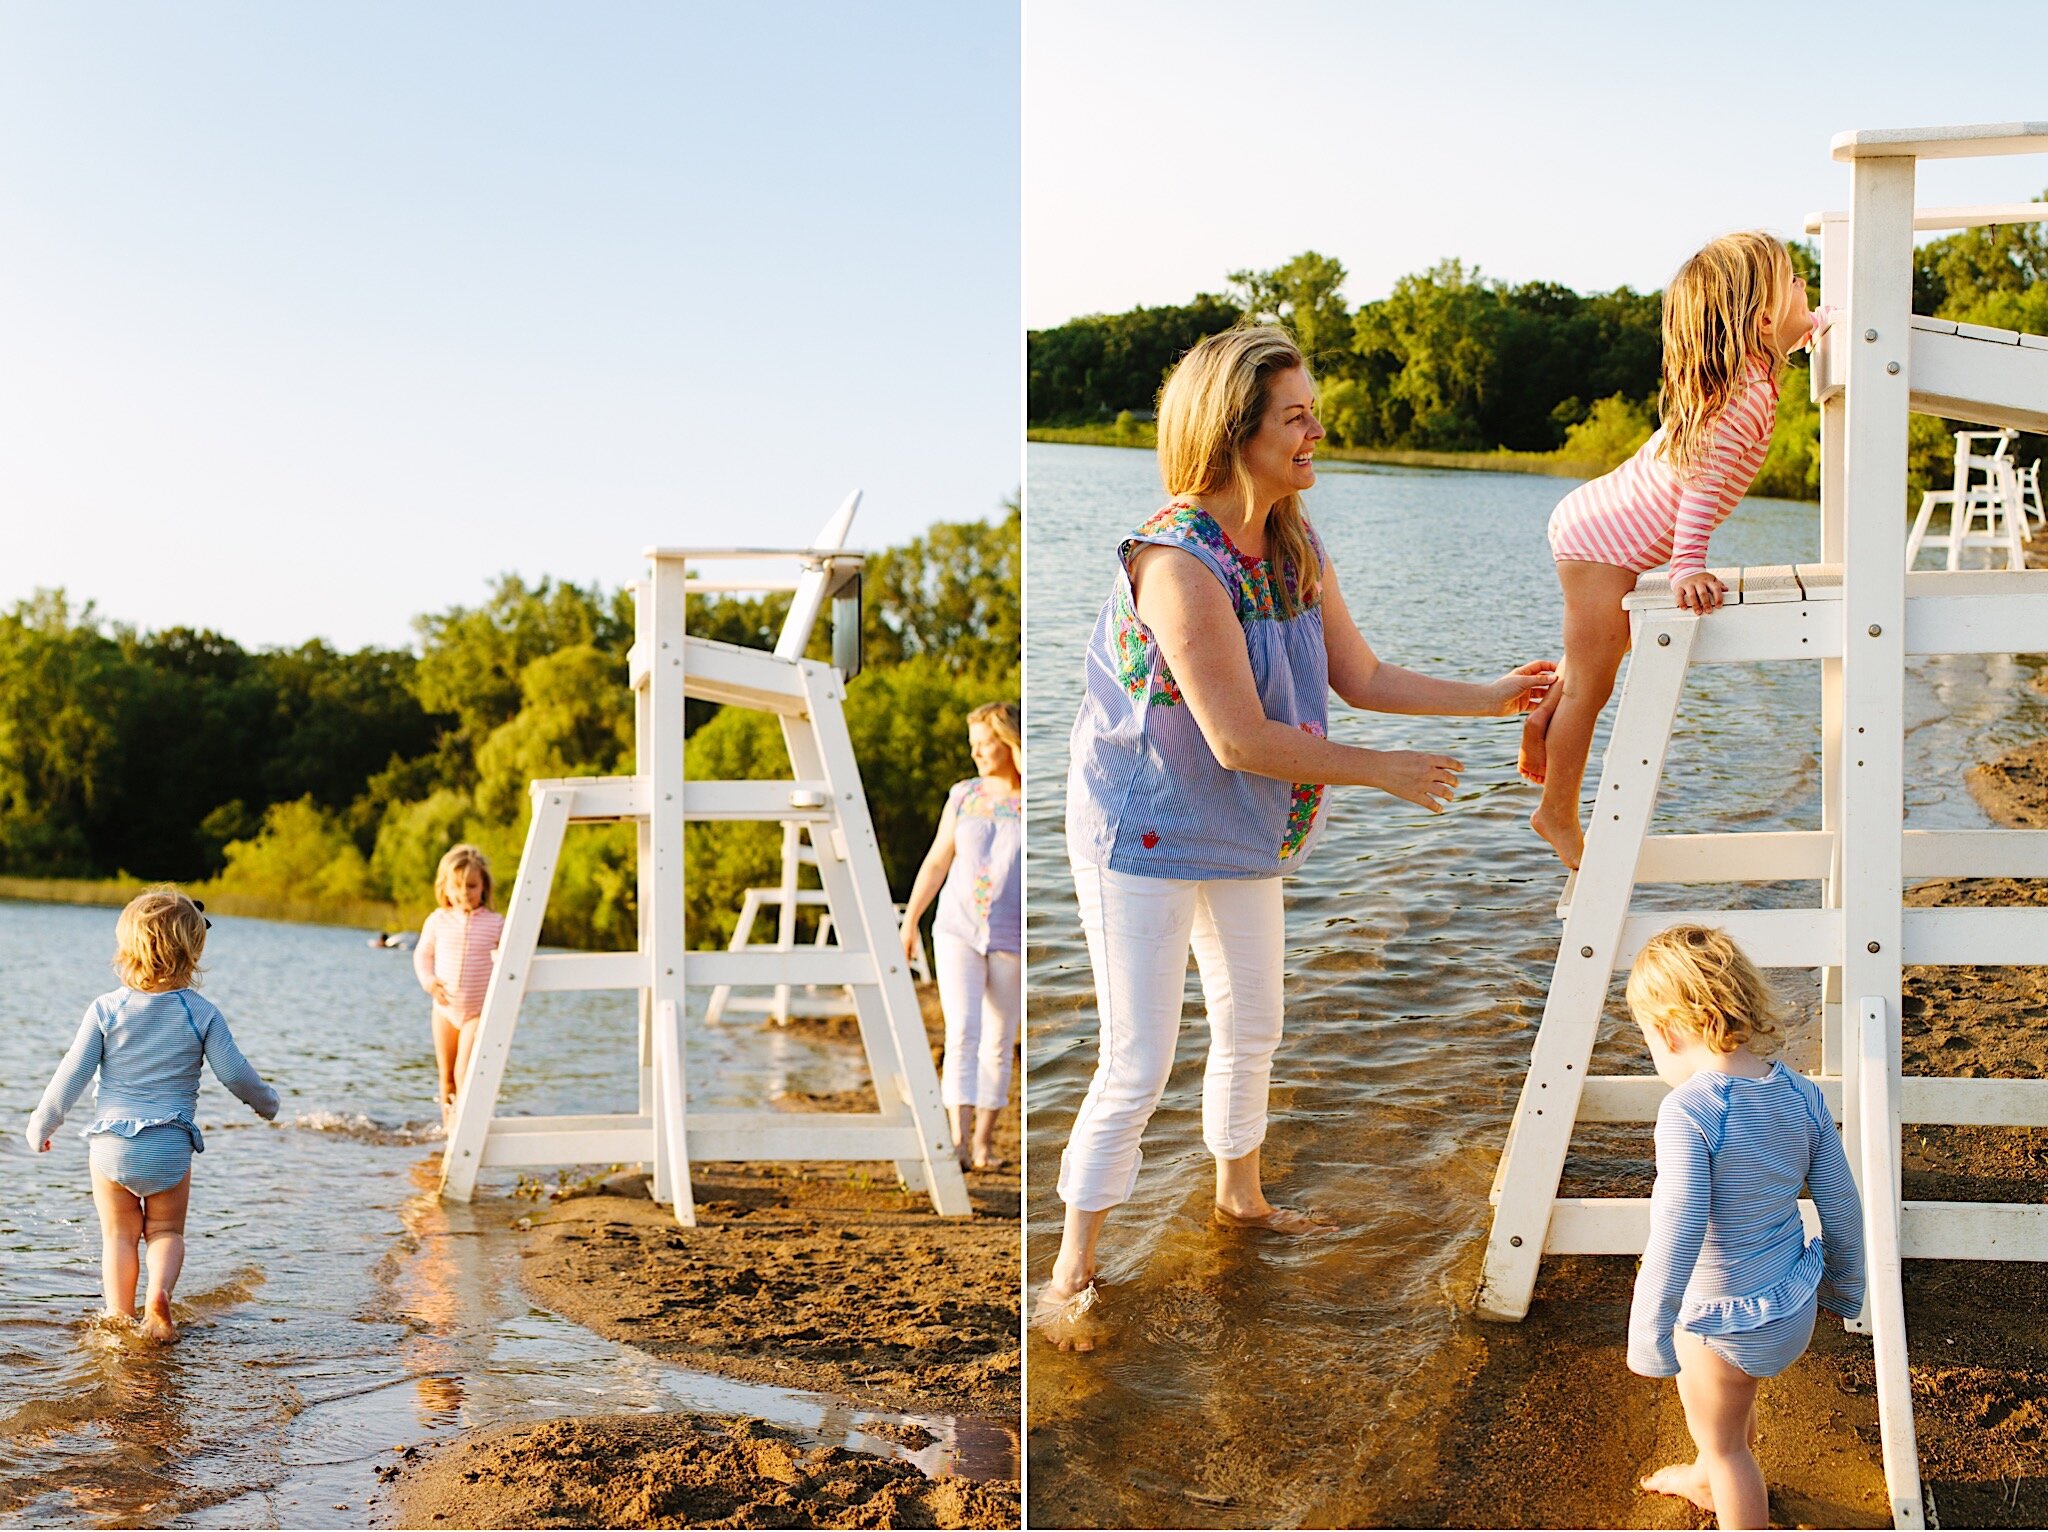 Family pictures on a lifeguard tower by a lake